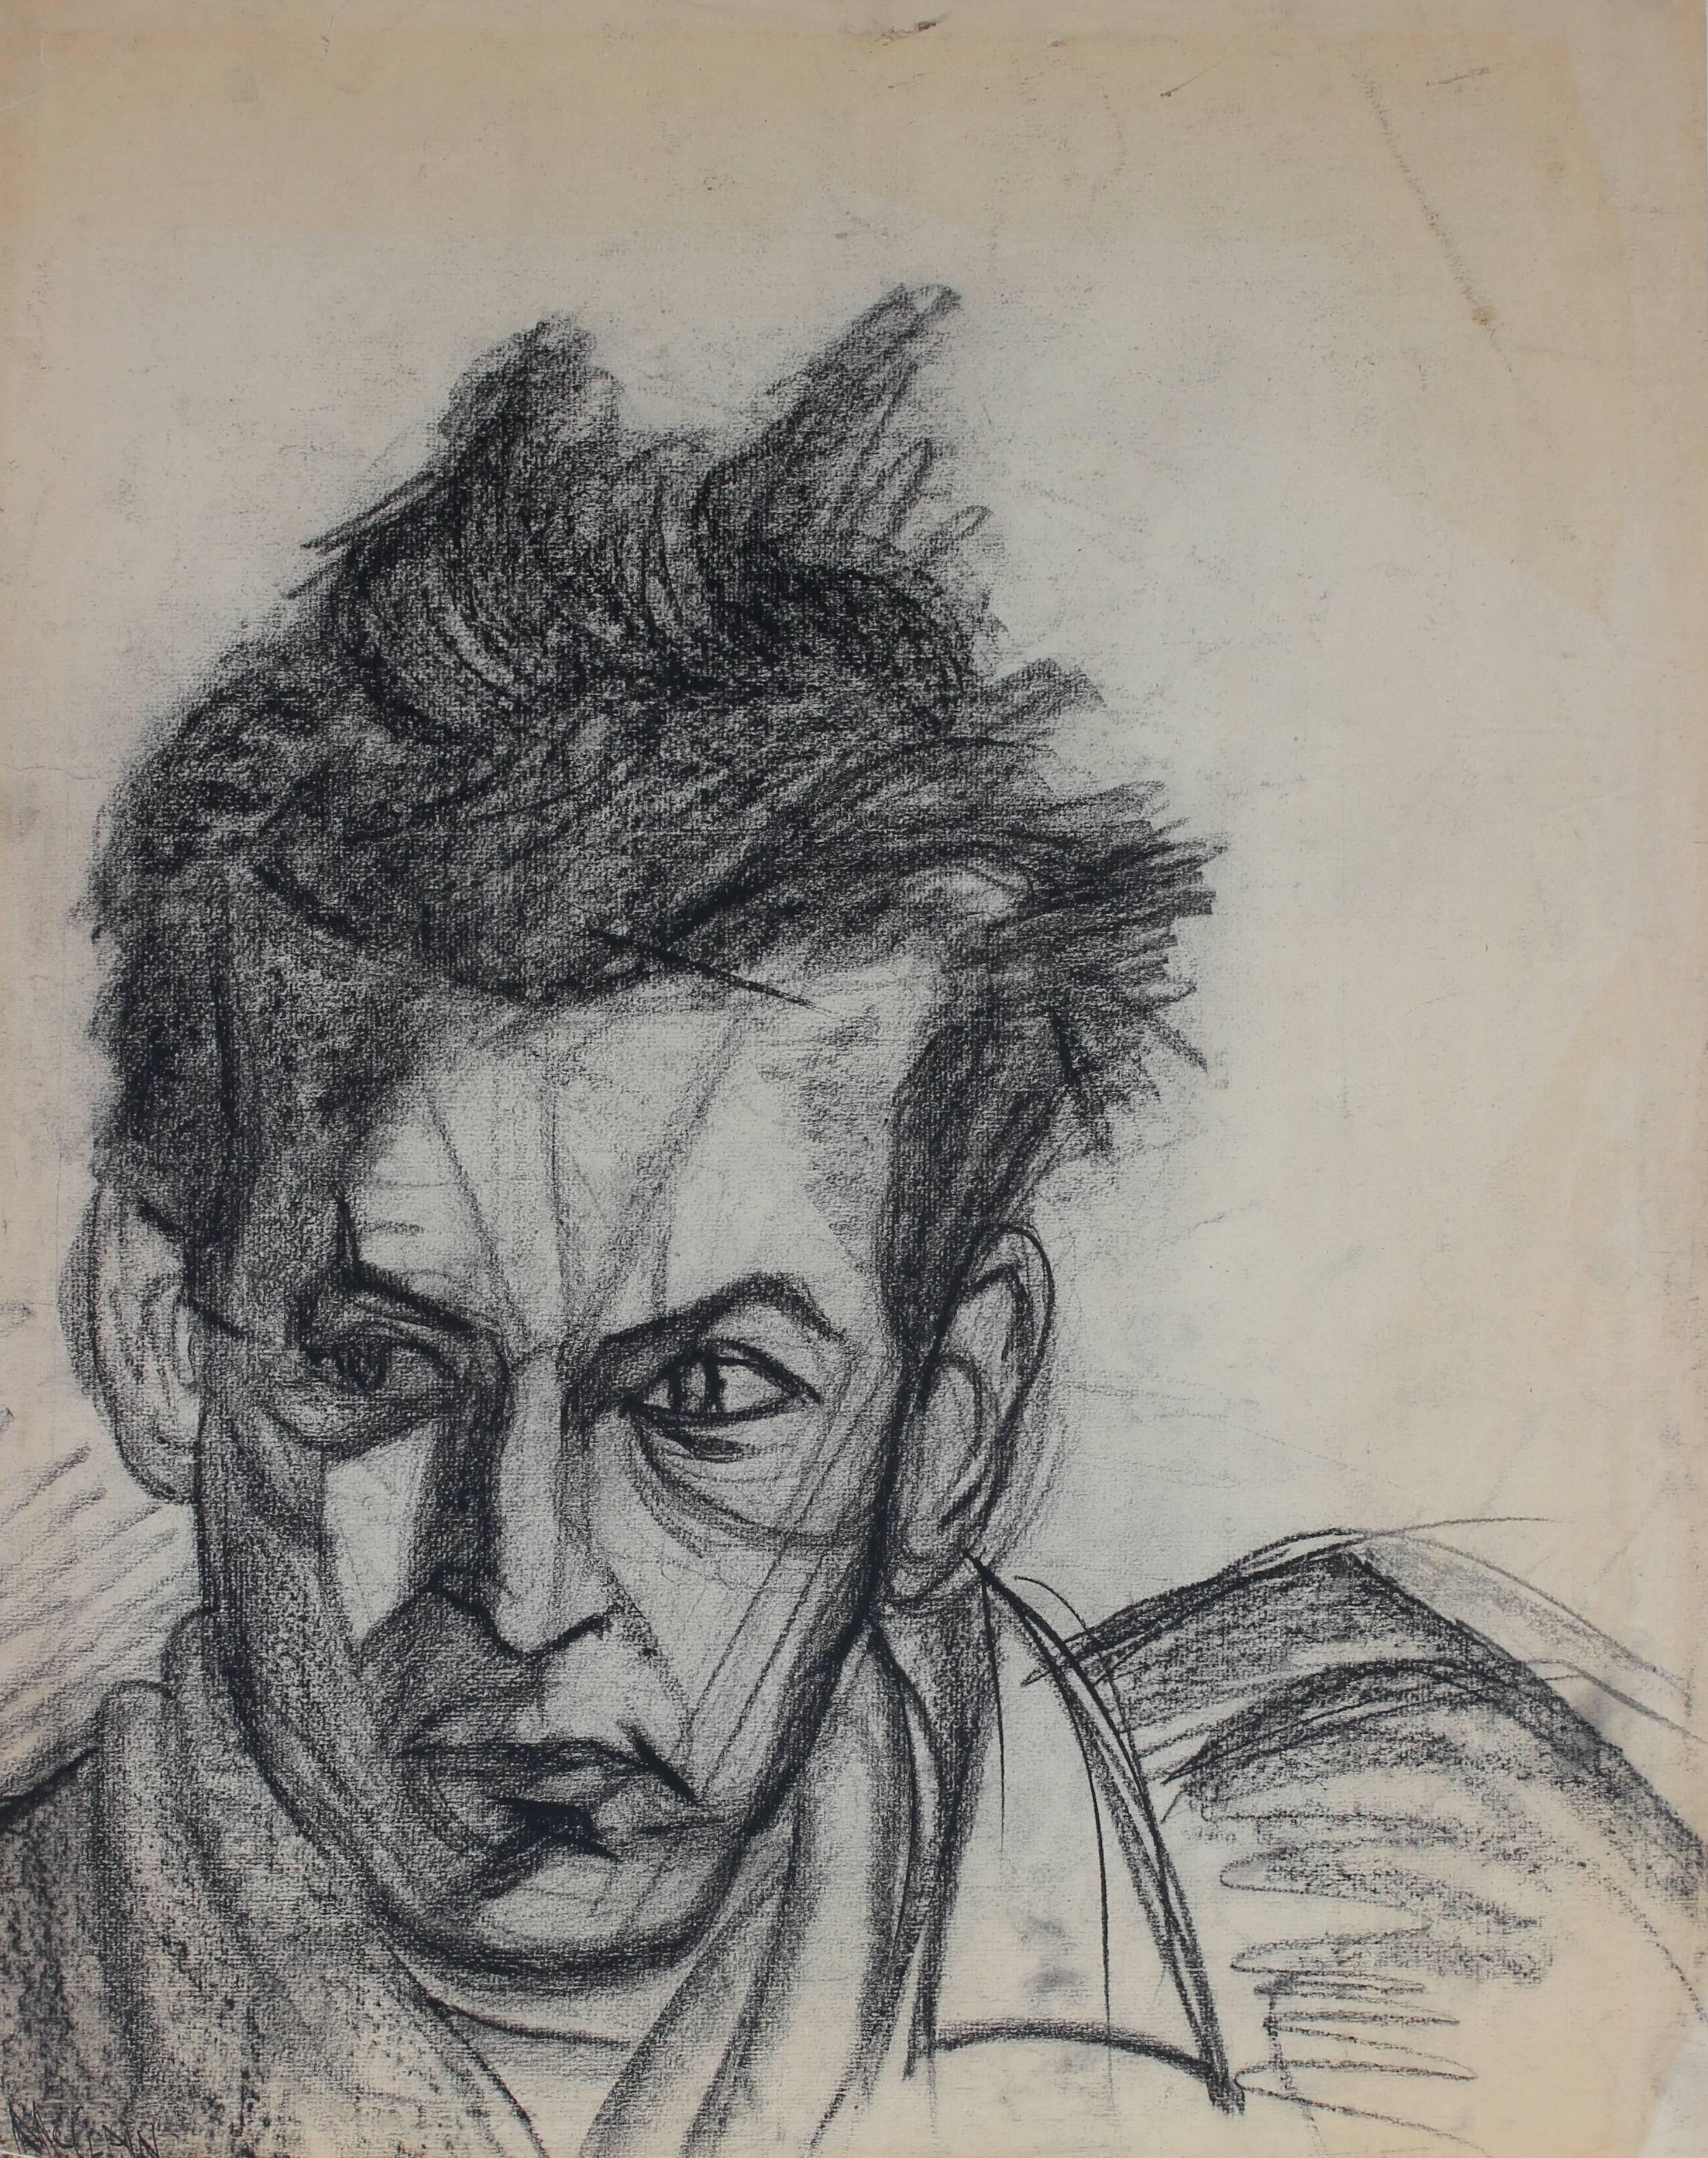 Expressionist Male Portrait in Charcoal, Mid 20th Century - Art by Malcolm McClain